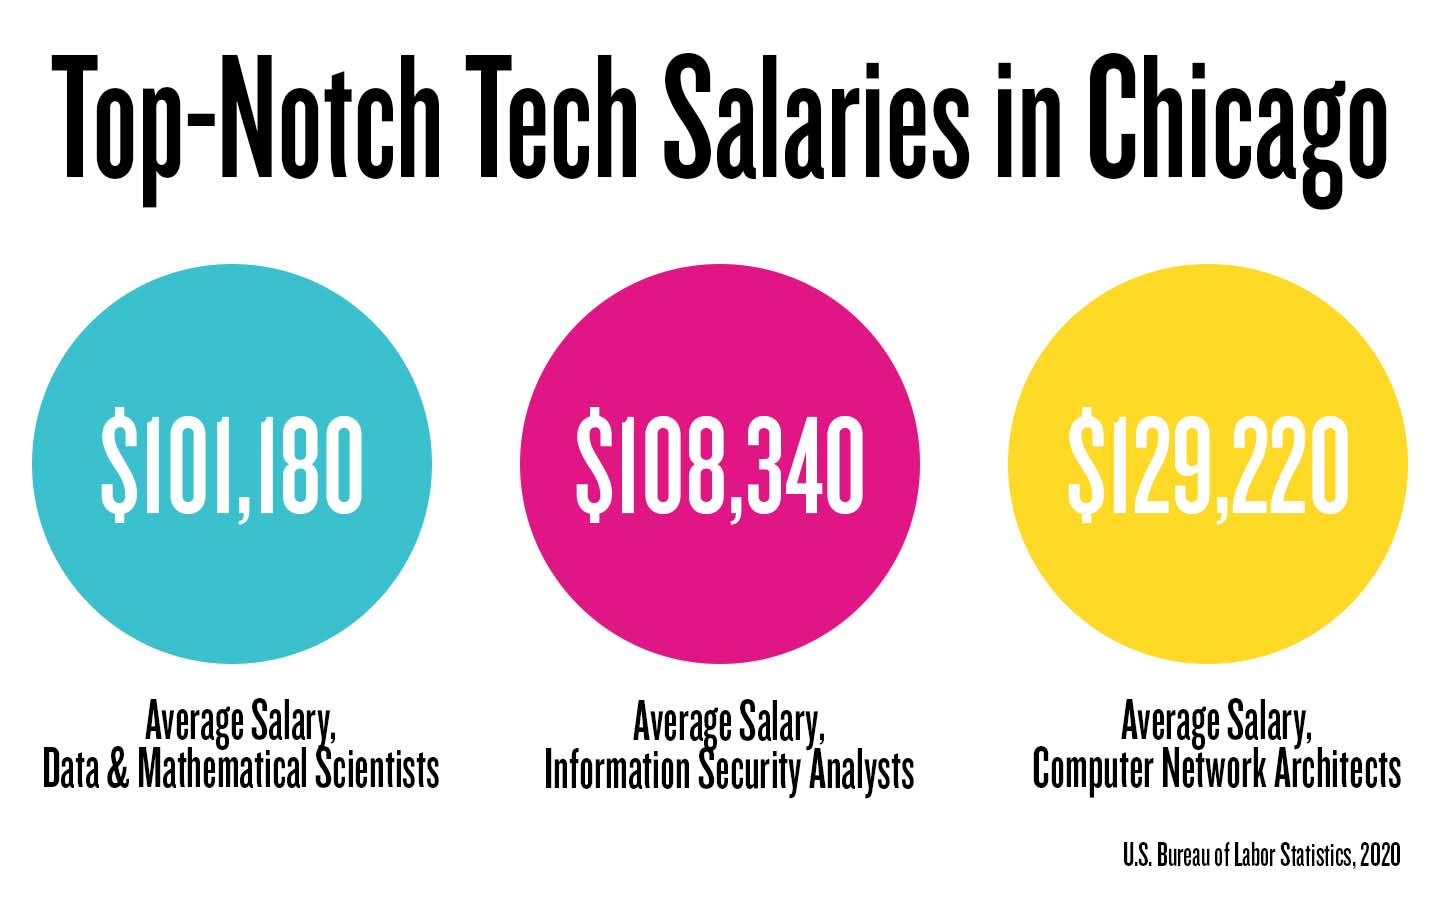 $101,180 average salary for data scientists, $108,340 average salaries for info security analysts, $129,220 average salary for network architects